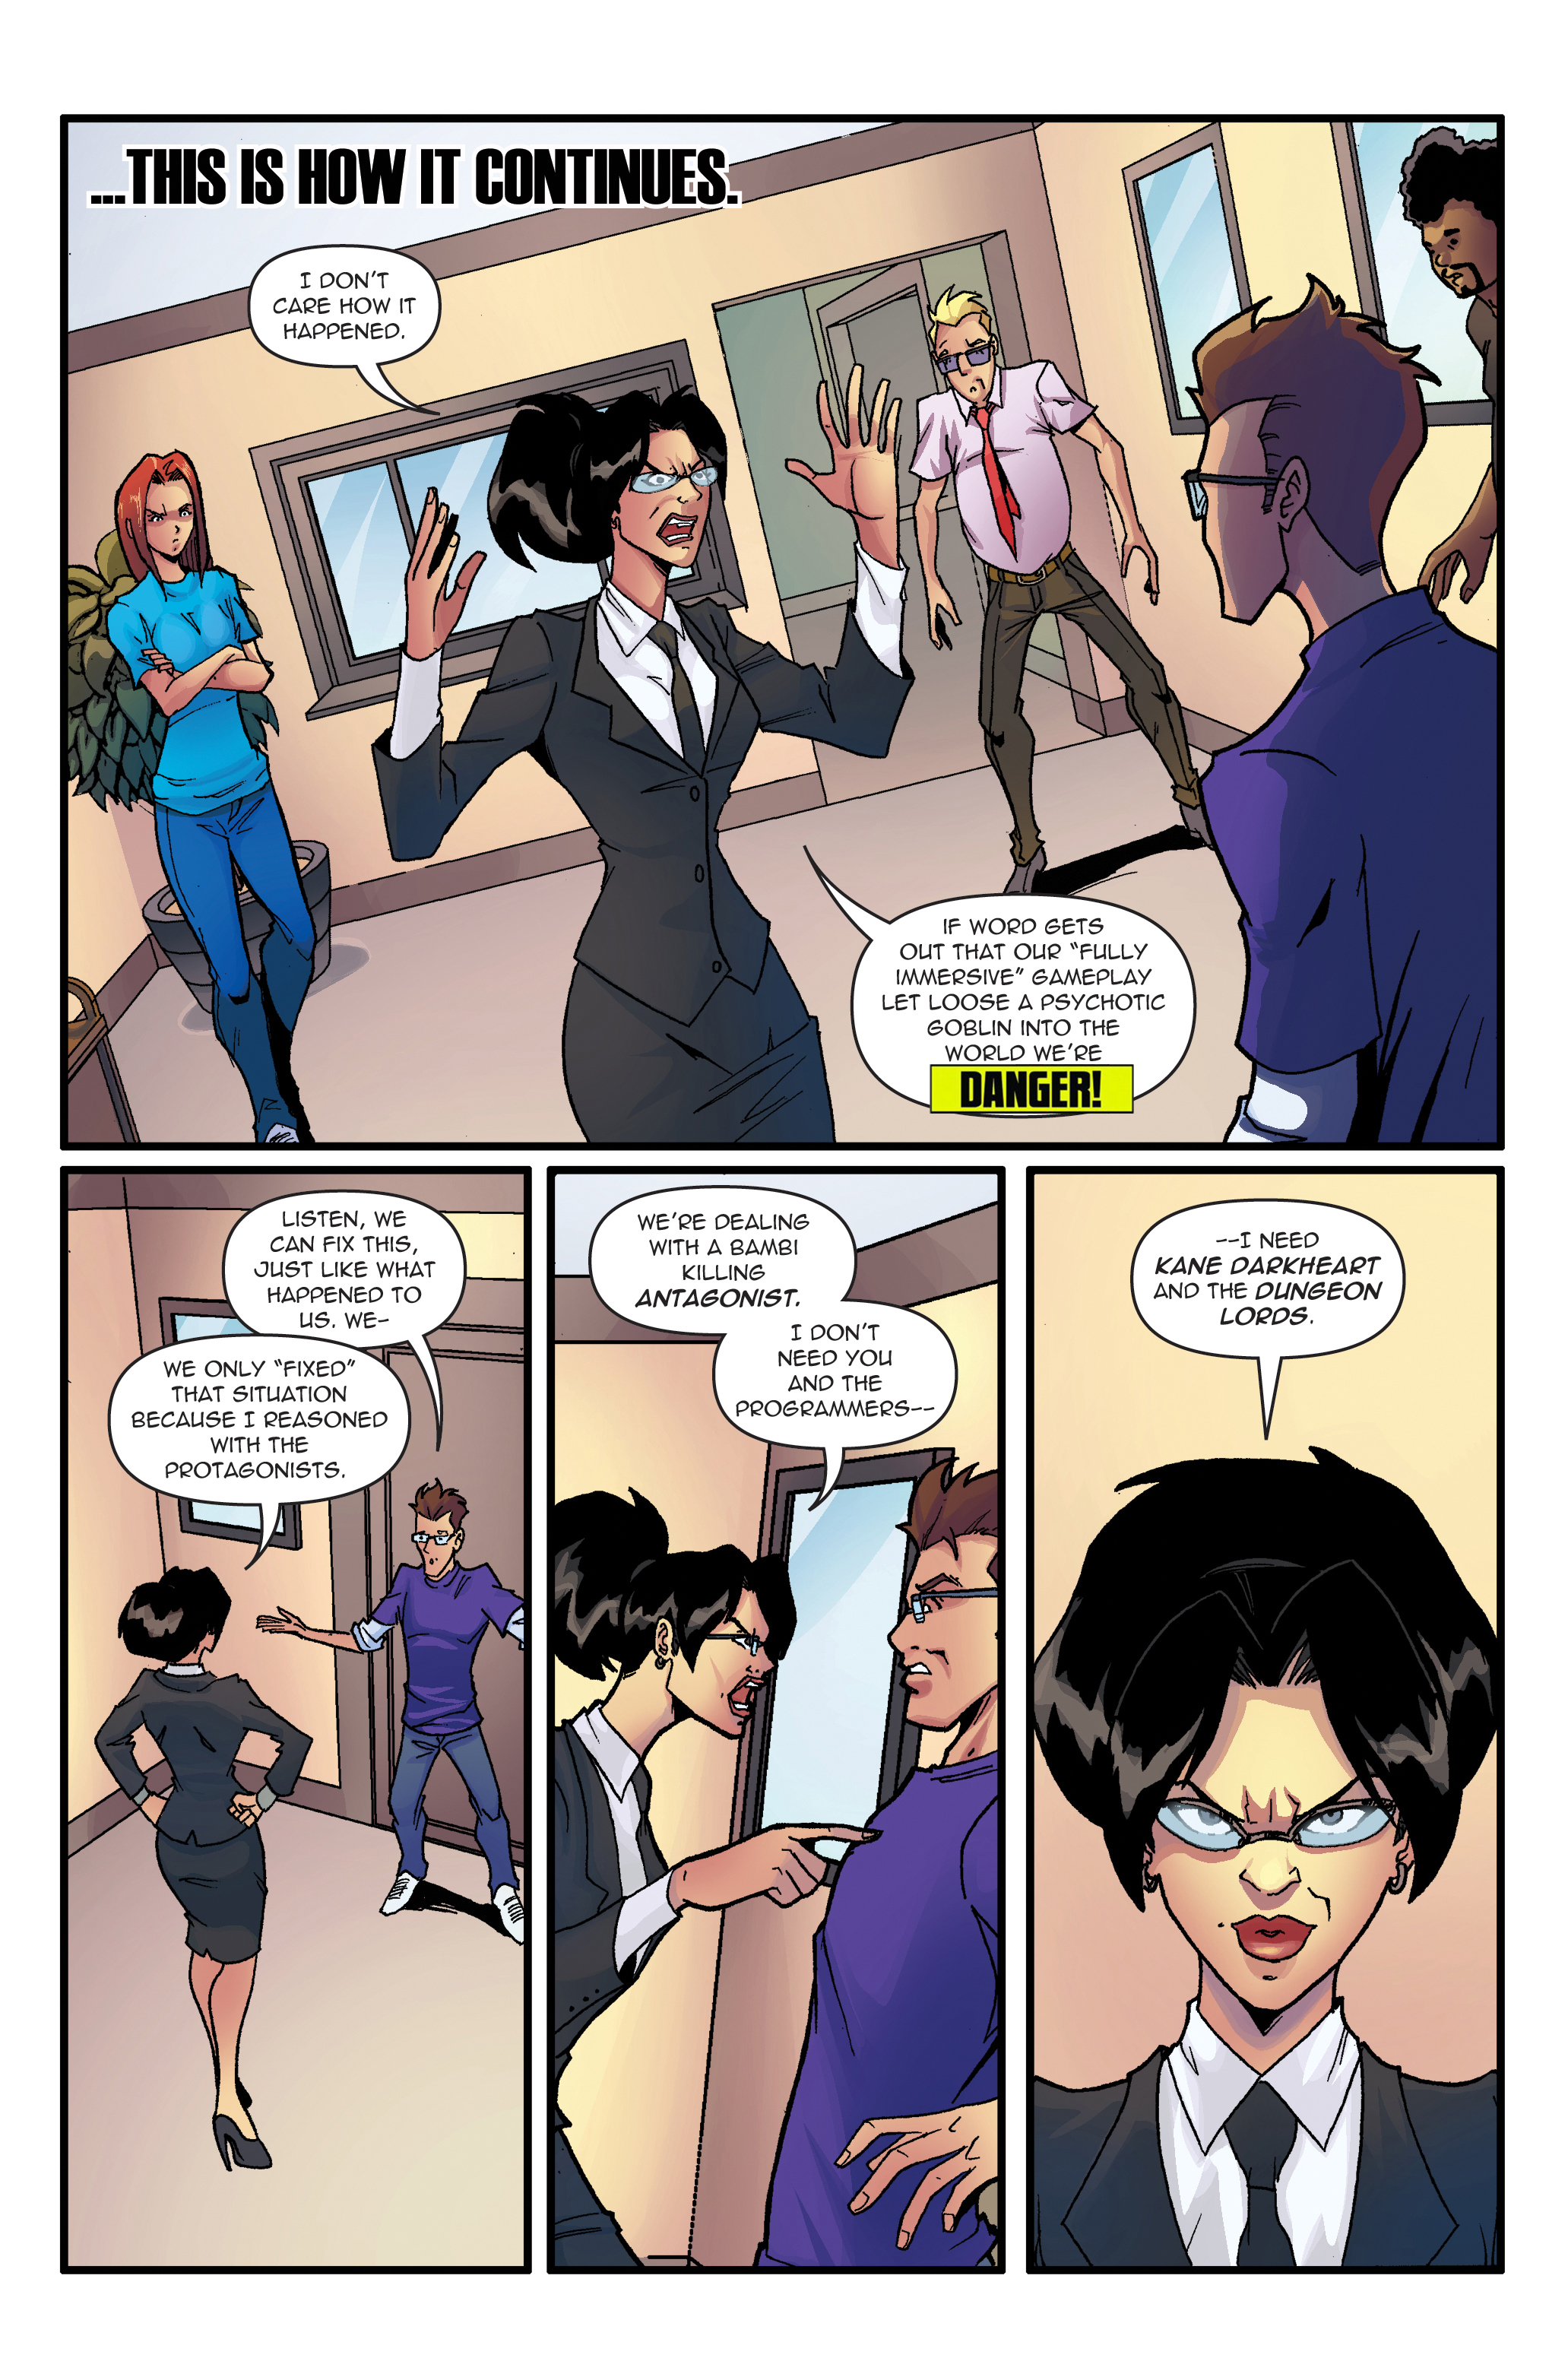 Double Jumpers Full Circle Jerks #1 Page 2.jpg